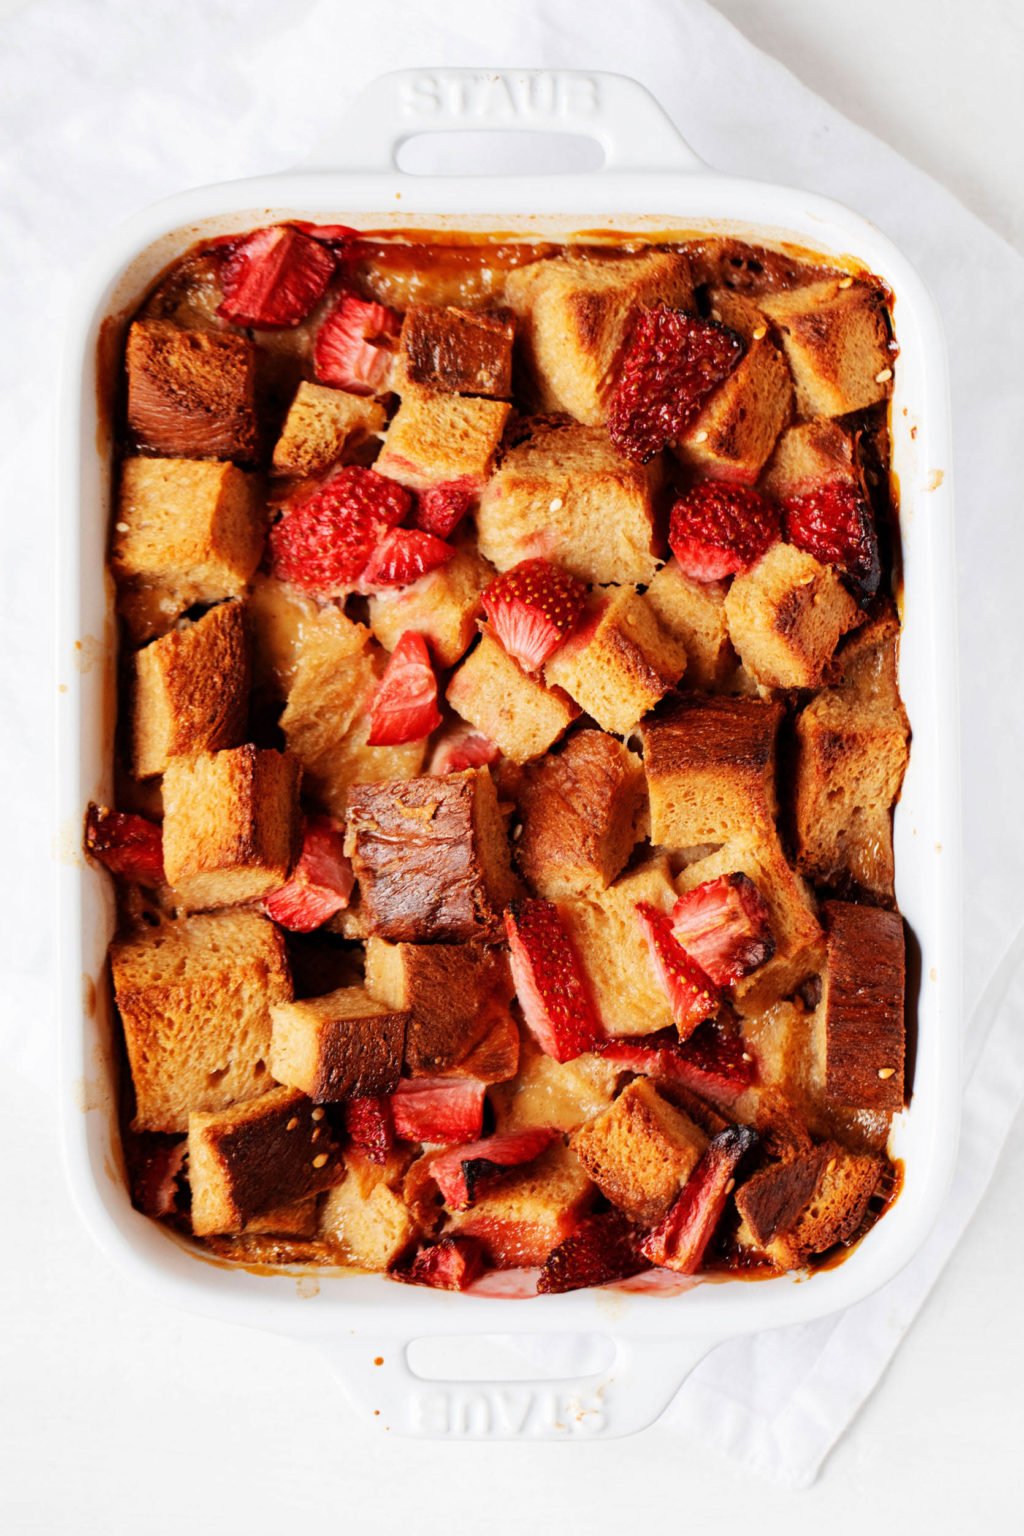 A rectangular, white baker holds a dish of baked French toast and strawberries.